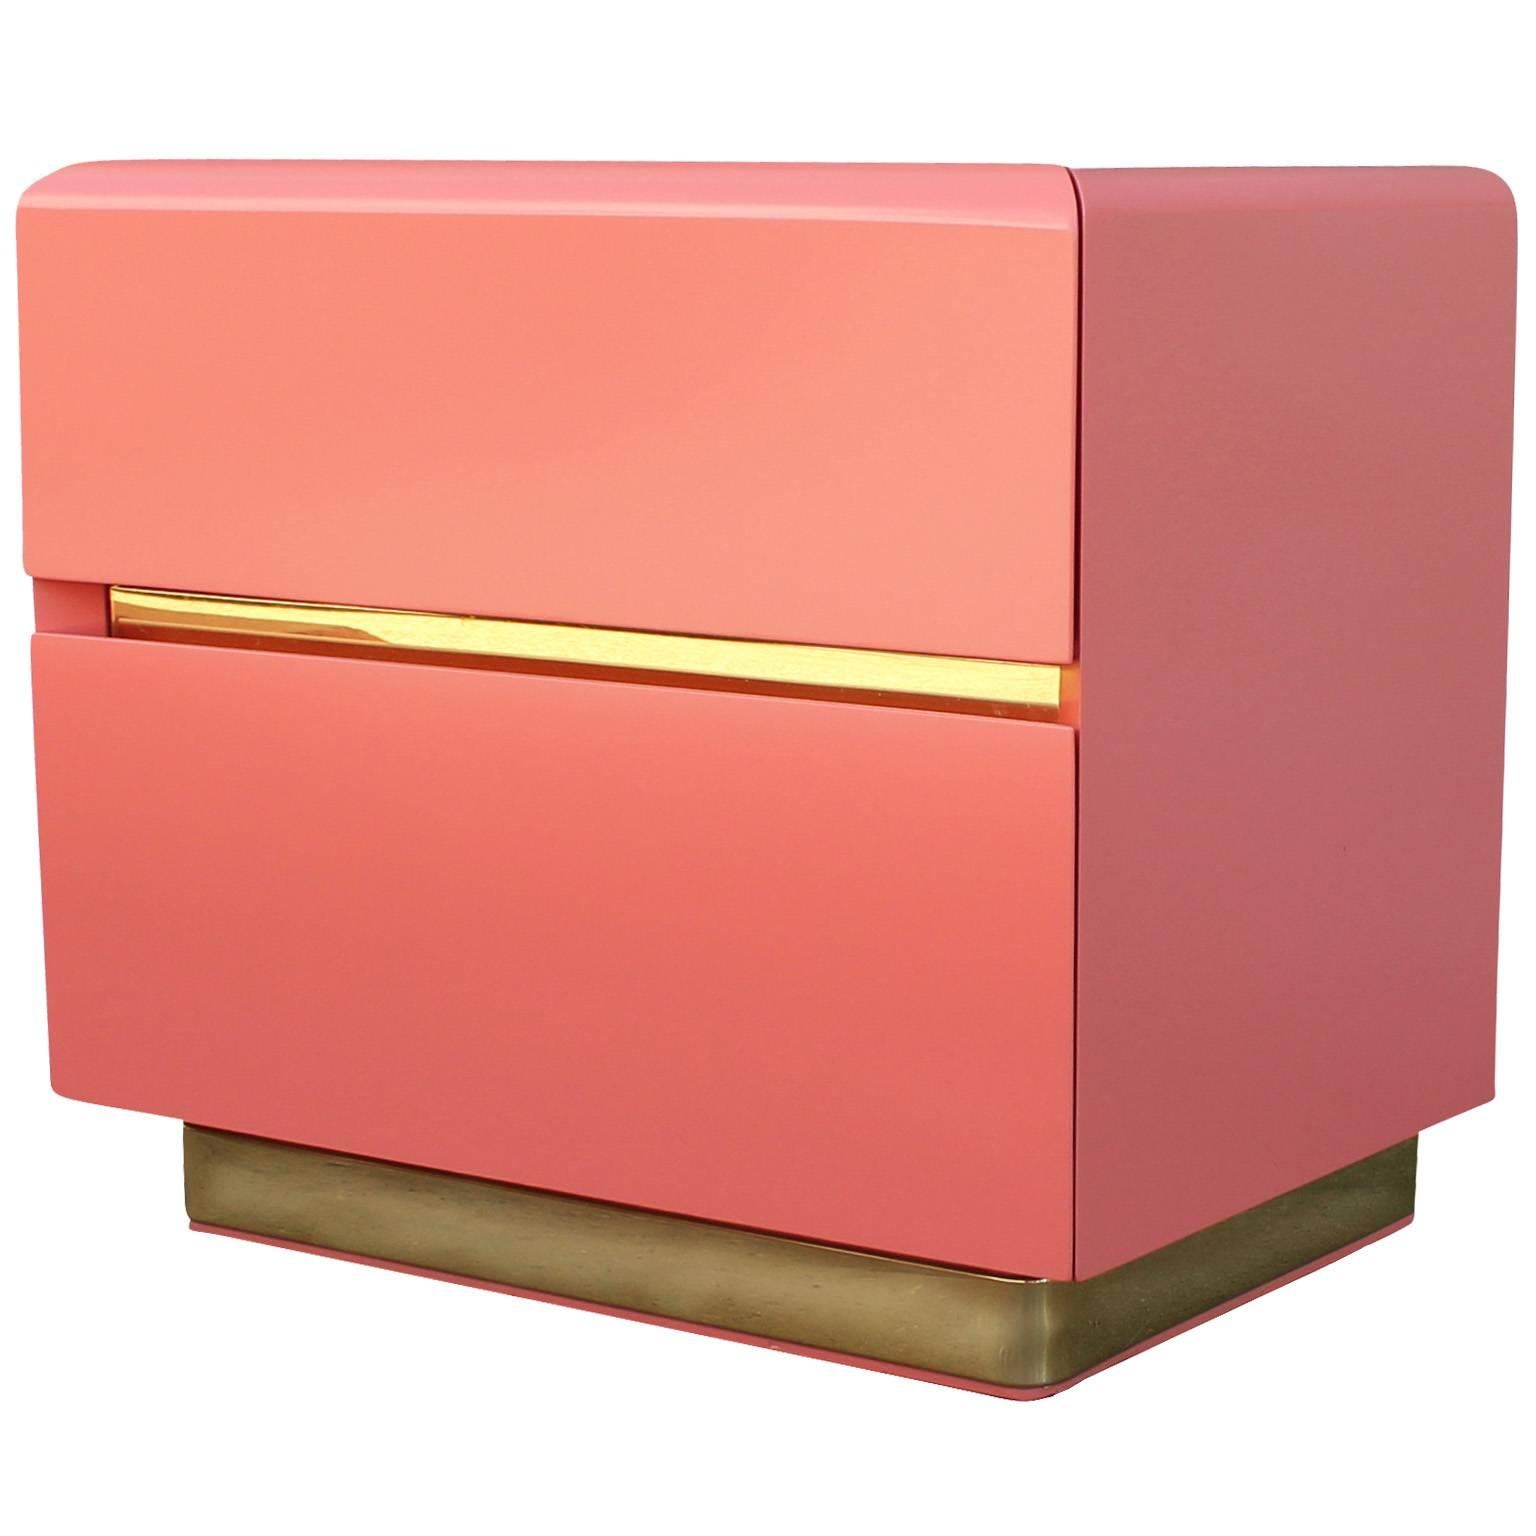 Hollywood Regency Glamorous Pair of Coral Lacquer and Brass Nightstands